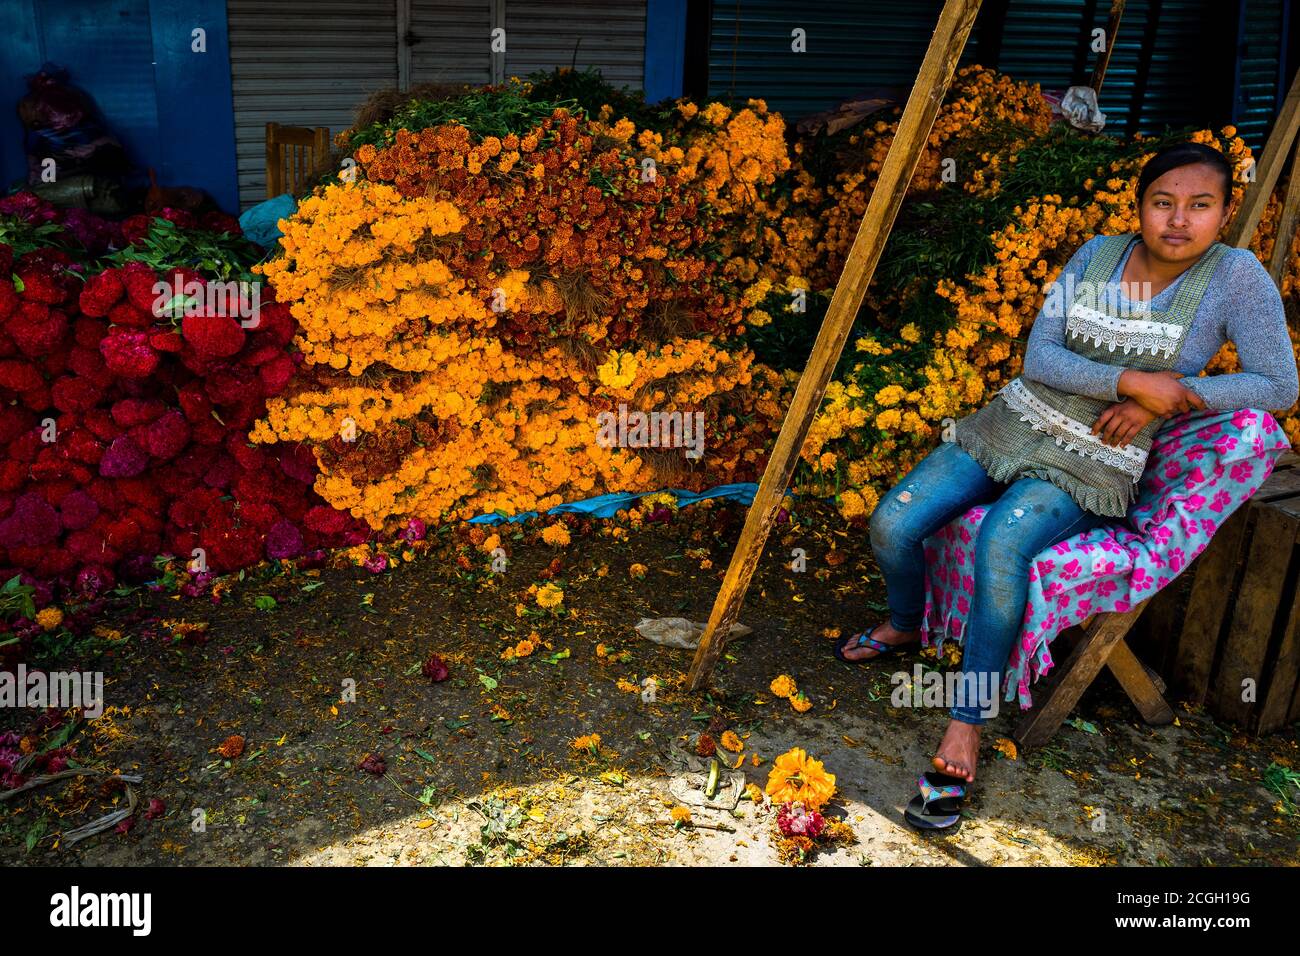 A Mexican flower market vendor sell piles of marigold flowers (Flor de muertos) for Day of the Dead celebrations in Oaxaca, Mexico. Stock Photo